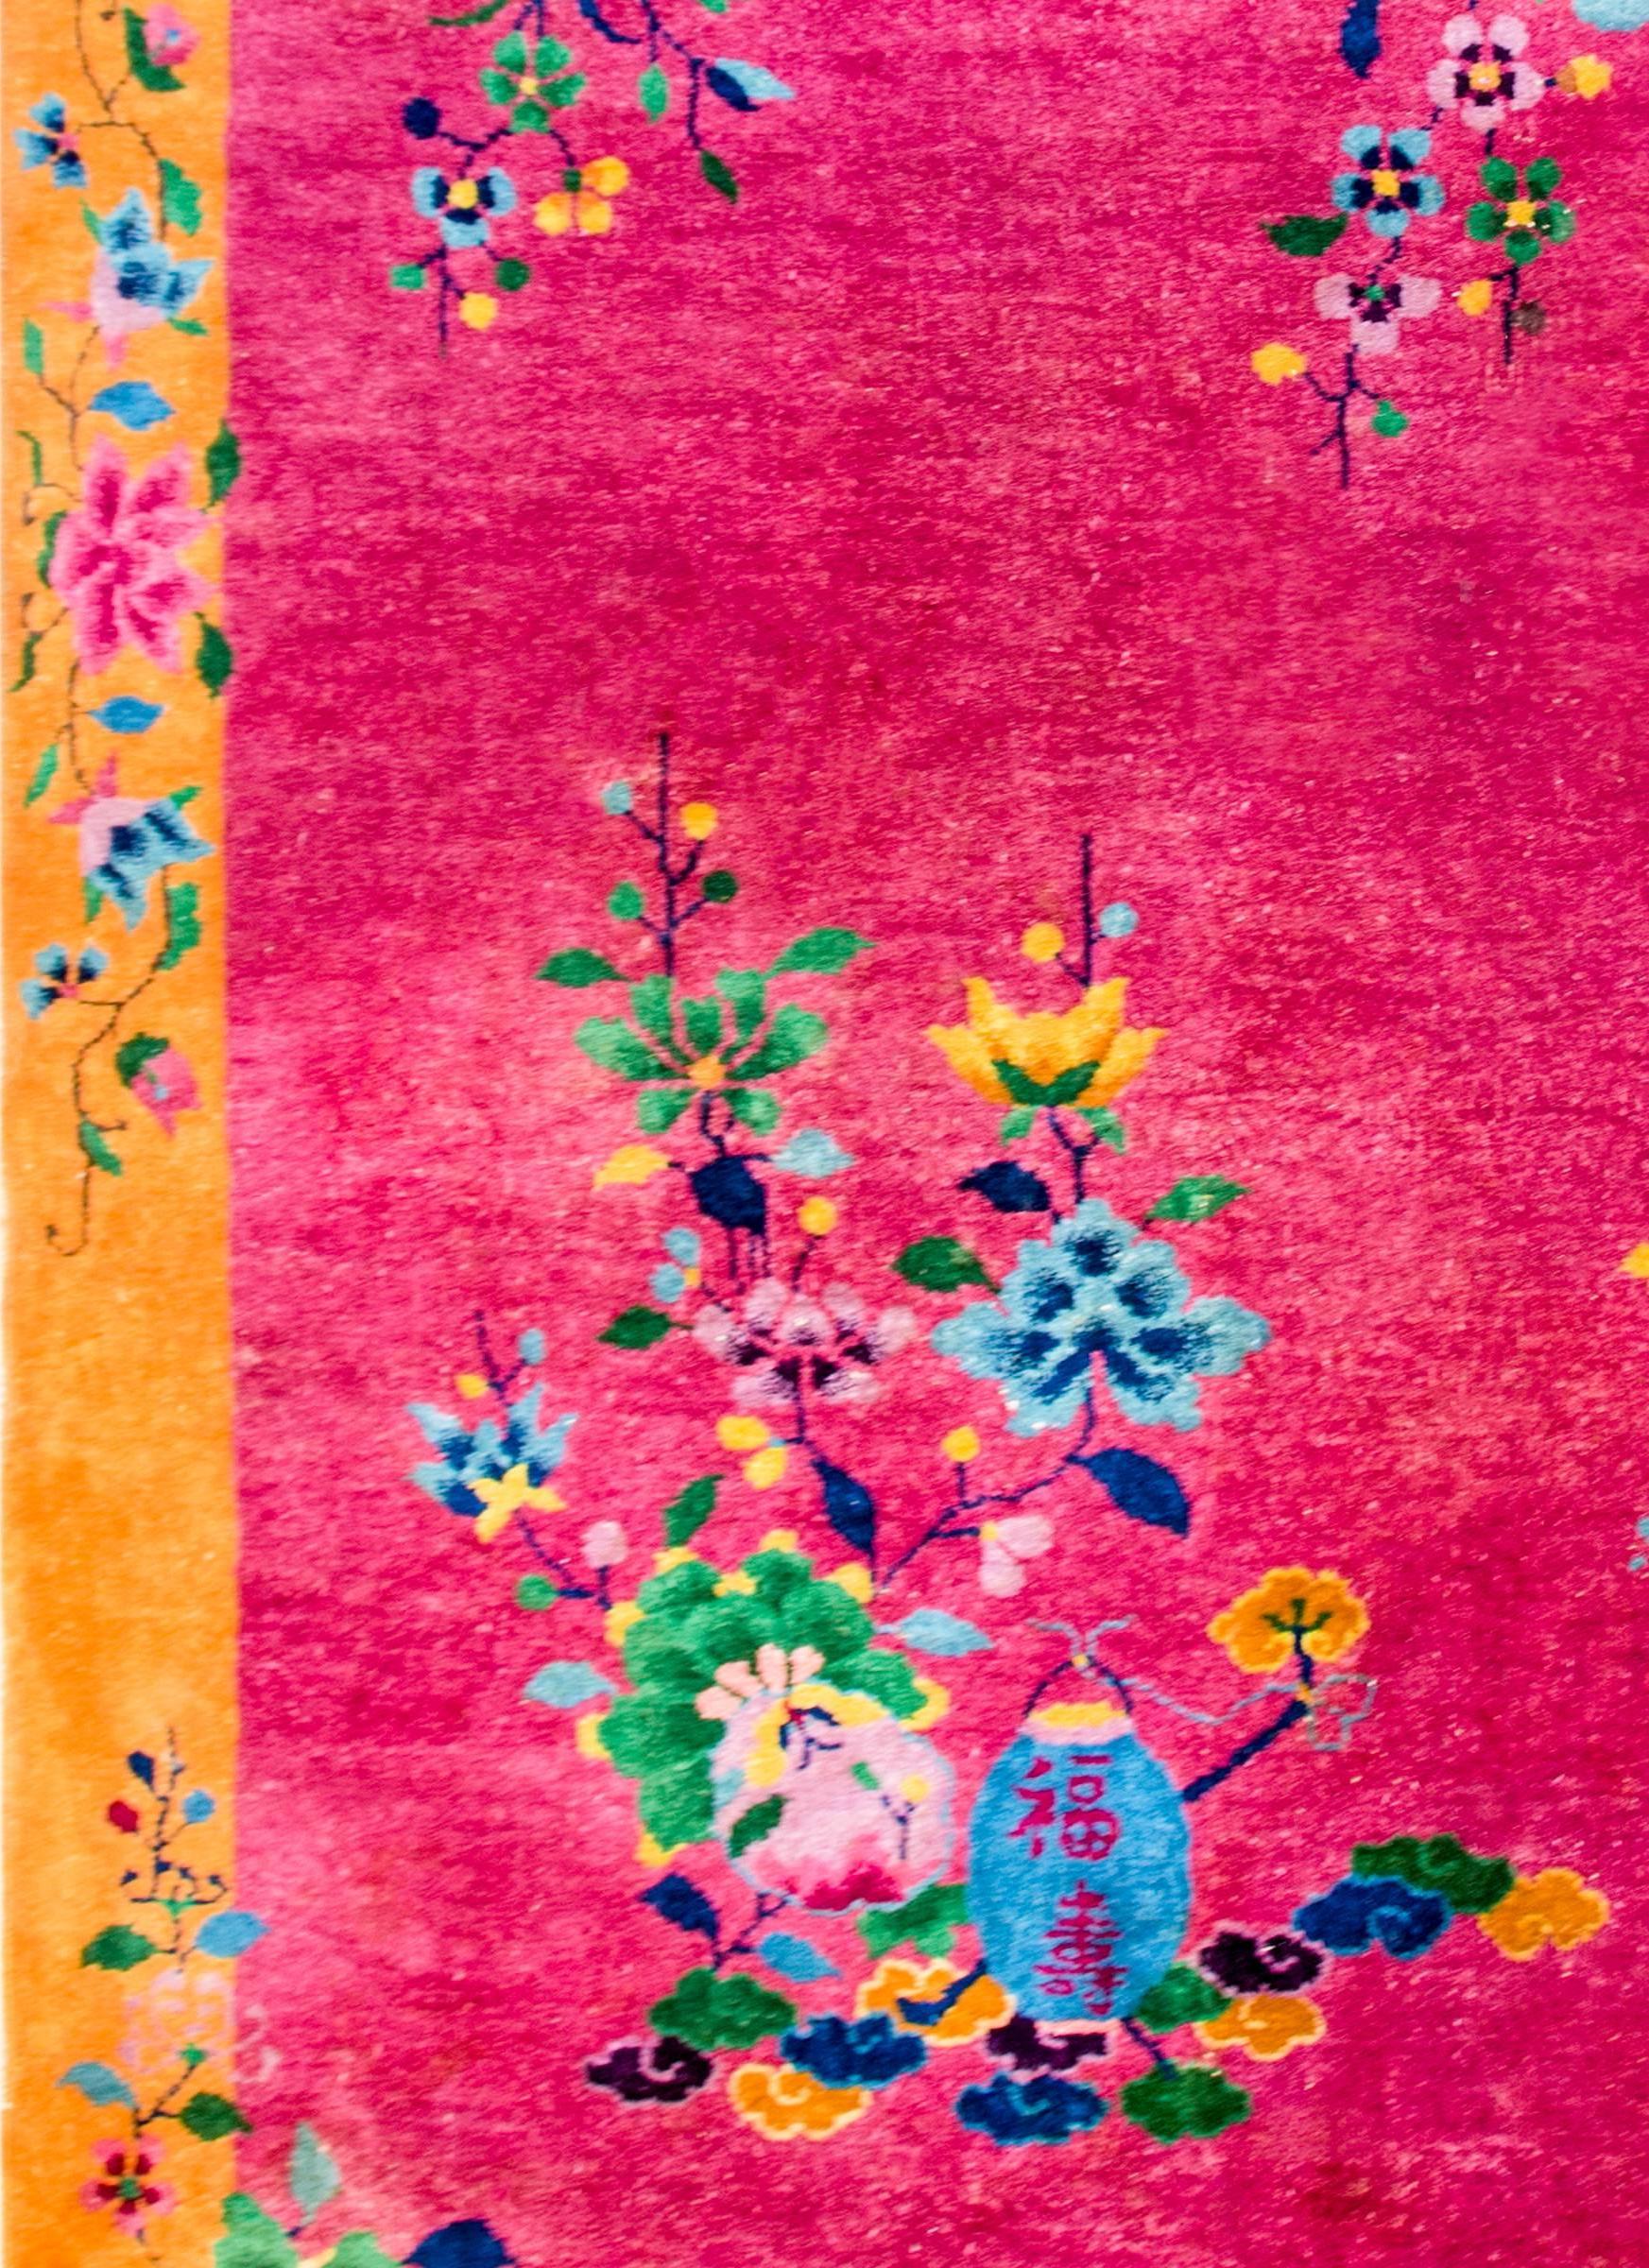 A brilliant early 20th century Chinese Art Deco rug with an asymmetrical floral pattern containing multicolored potted peonies in opposite corners, on a bold pink background. The border is wide, with a complimentary multicolored peony pattern on a